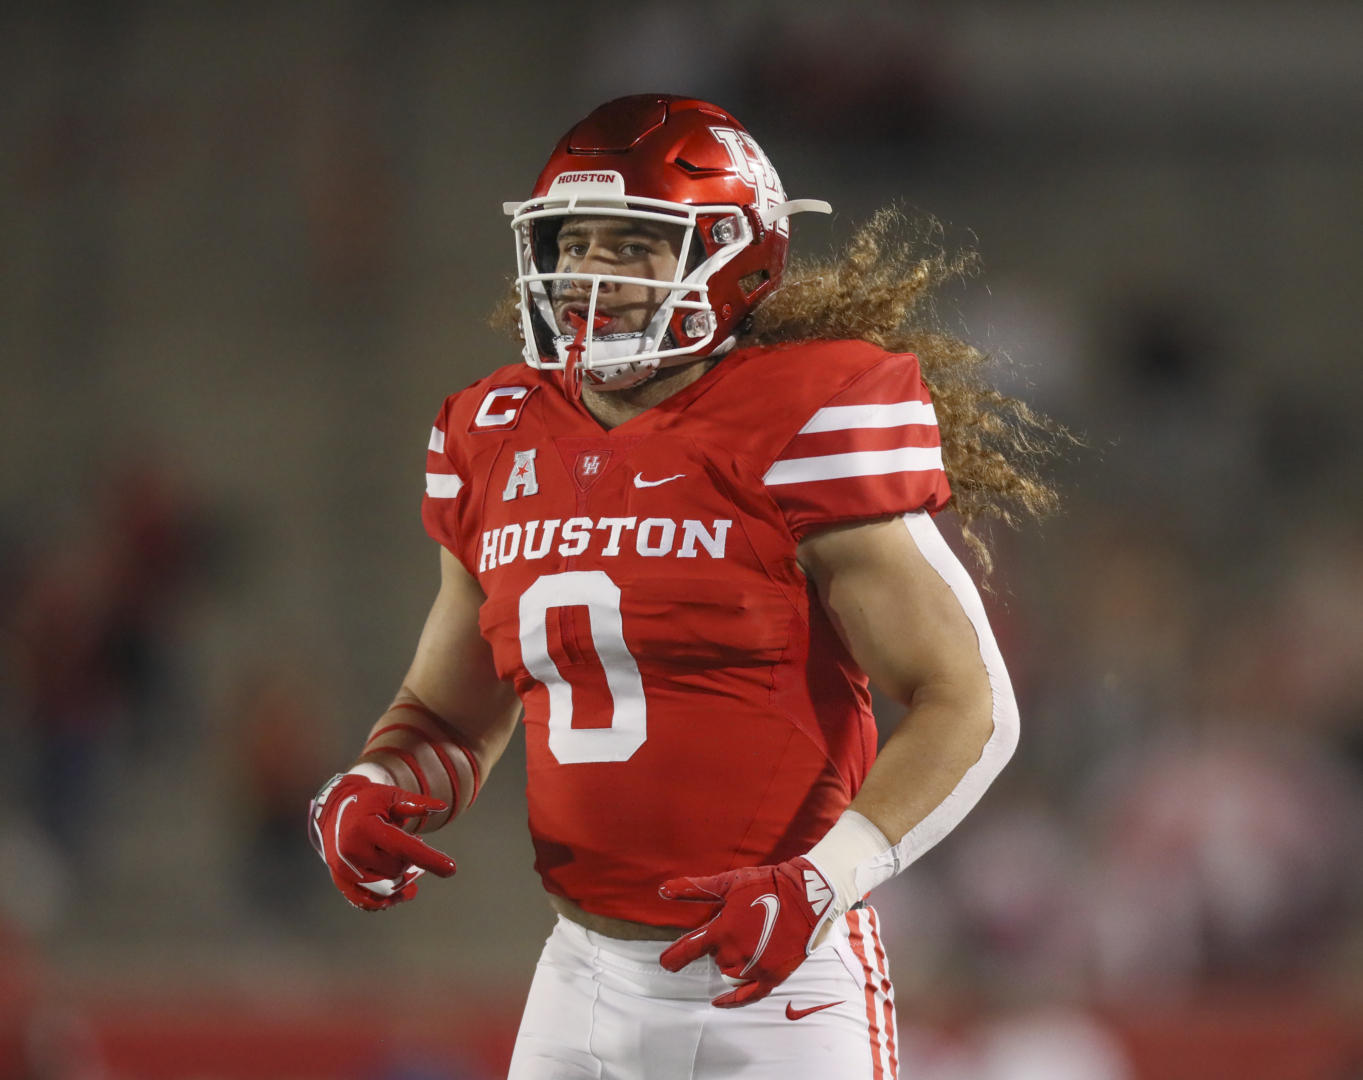 Senior linebacker and captain Grant Stuard takes the field in the Cougars matchup against BYU | Courtesy of UH athletics